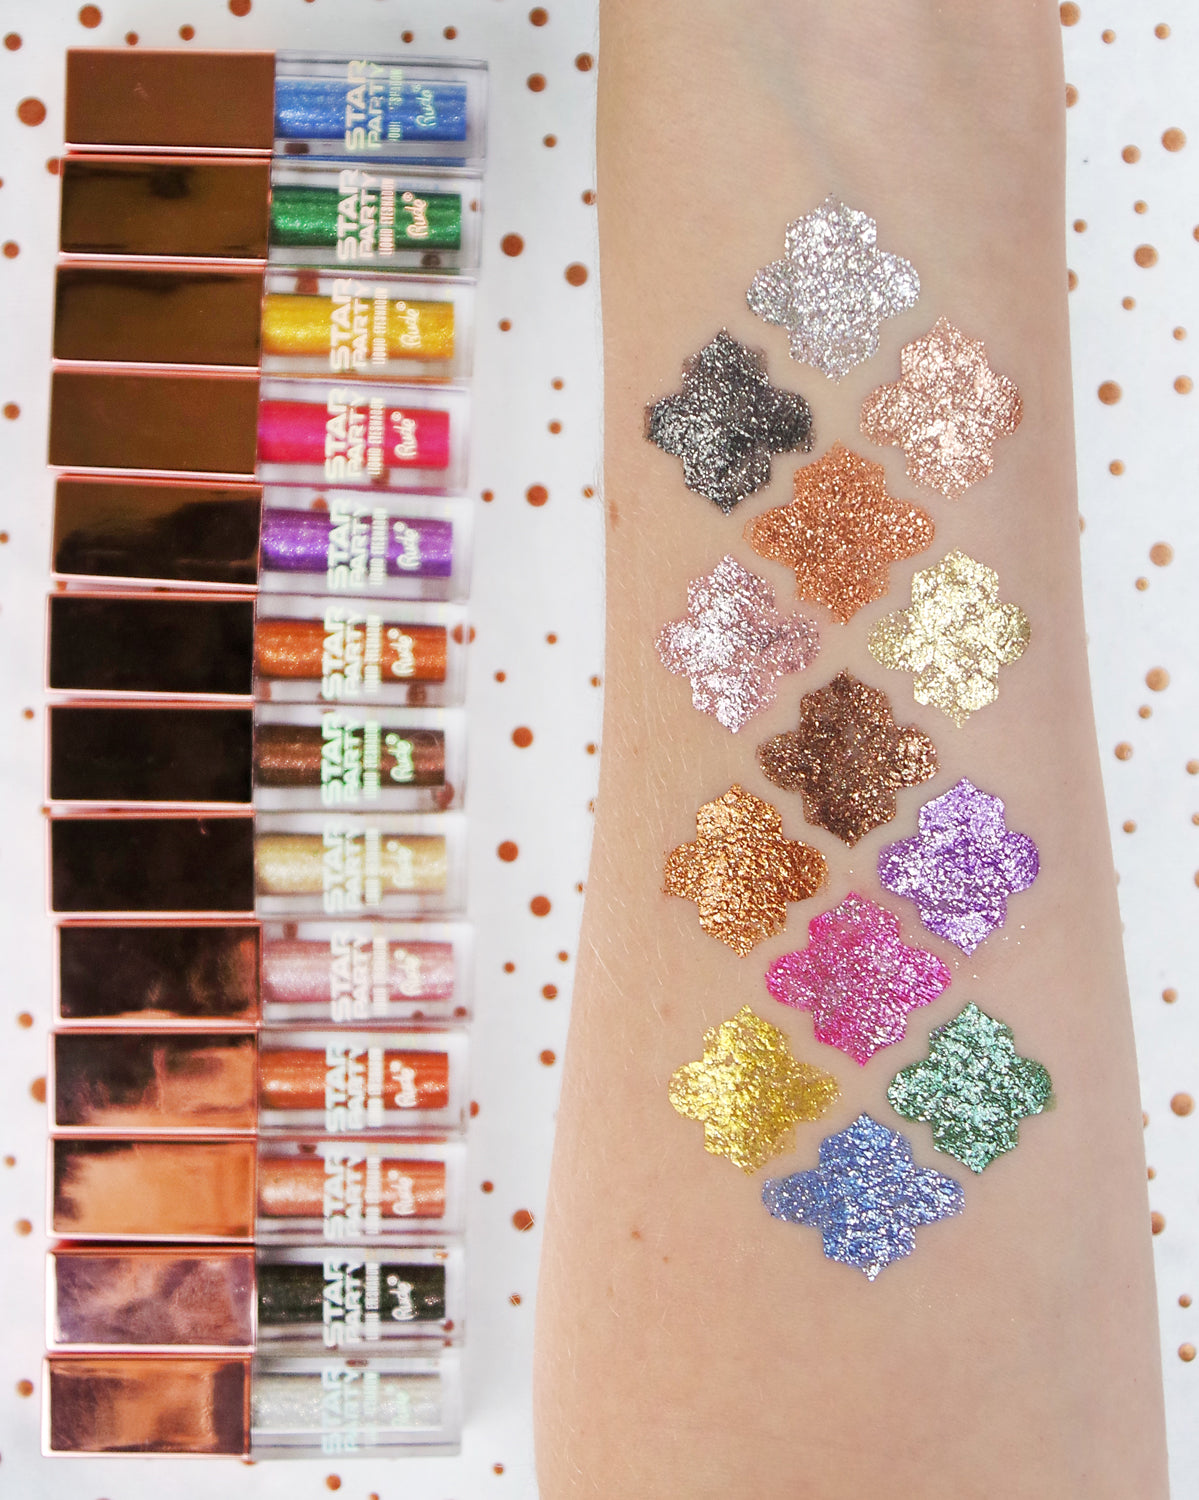 Star Party Liquid Eyeshadow Complete Set (SPECIAL DEAL) Swatch